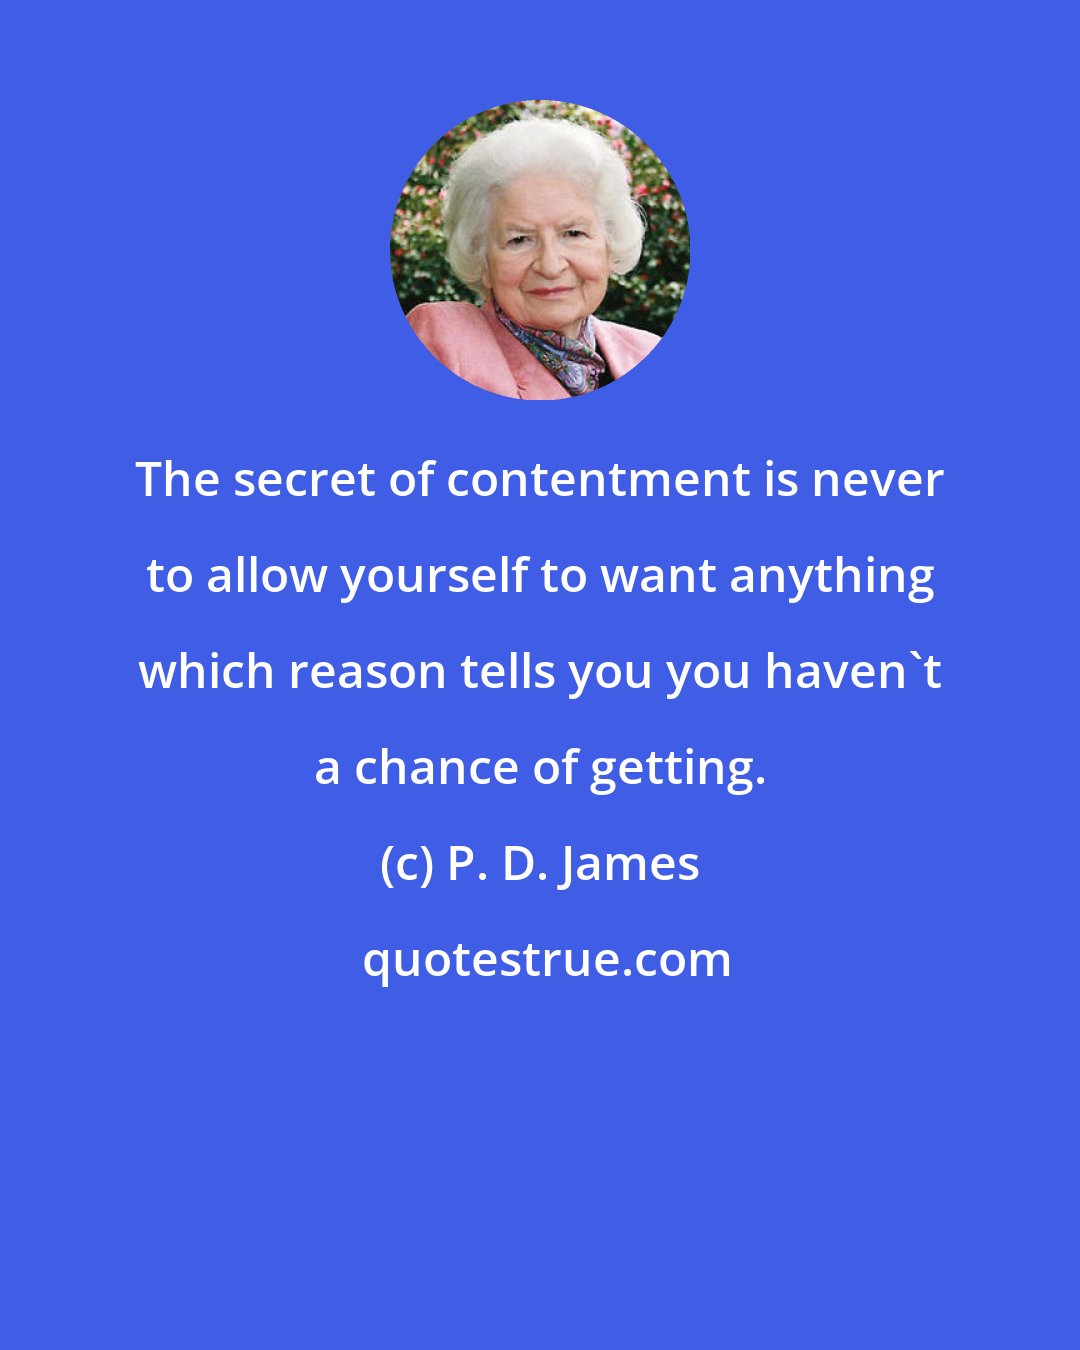 P. D. James: The secret of contentment is never to allow yourself to want anything which reason tells you you haven't a chance of getting.